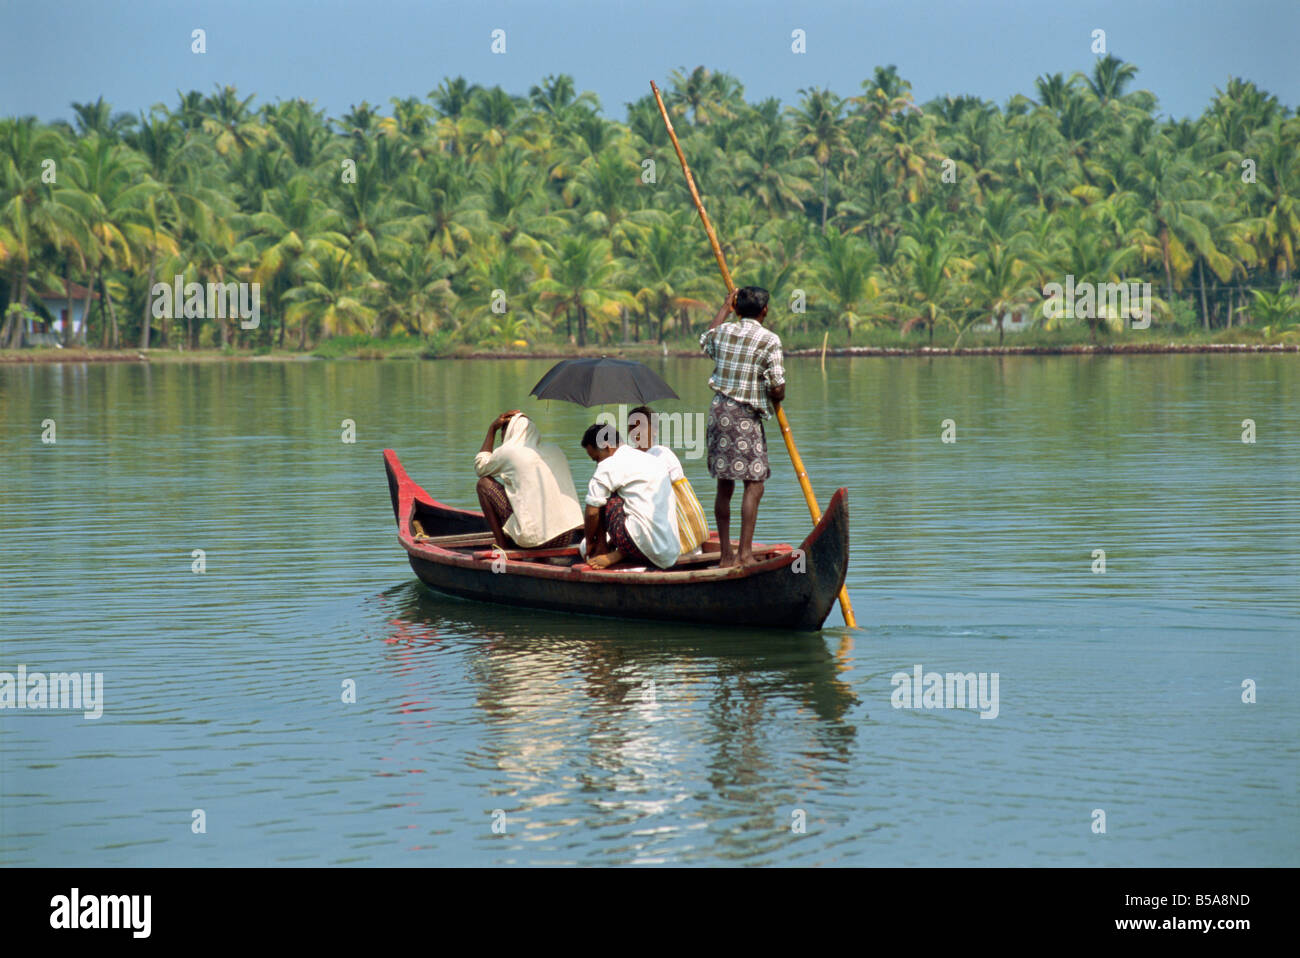 Canals and rivers used as roadways, ferry on Backwaters, Kerala state, India Stock Photo